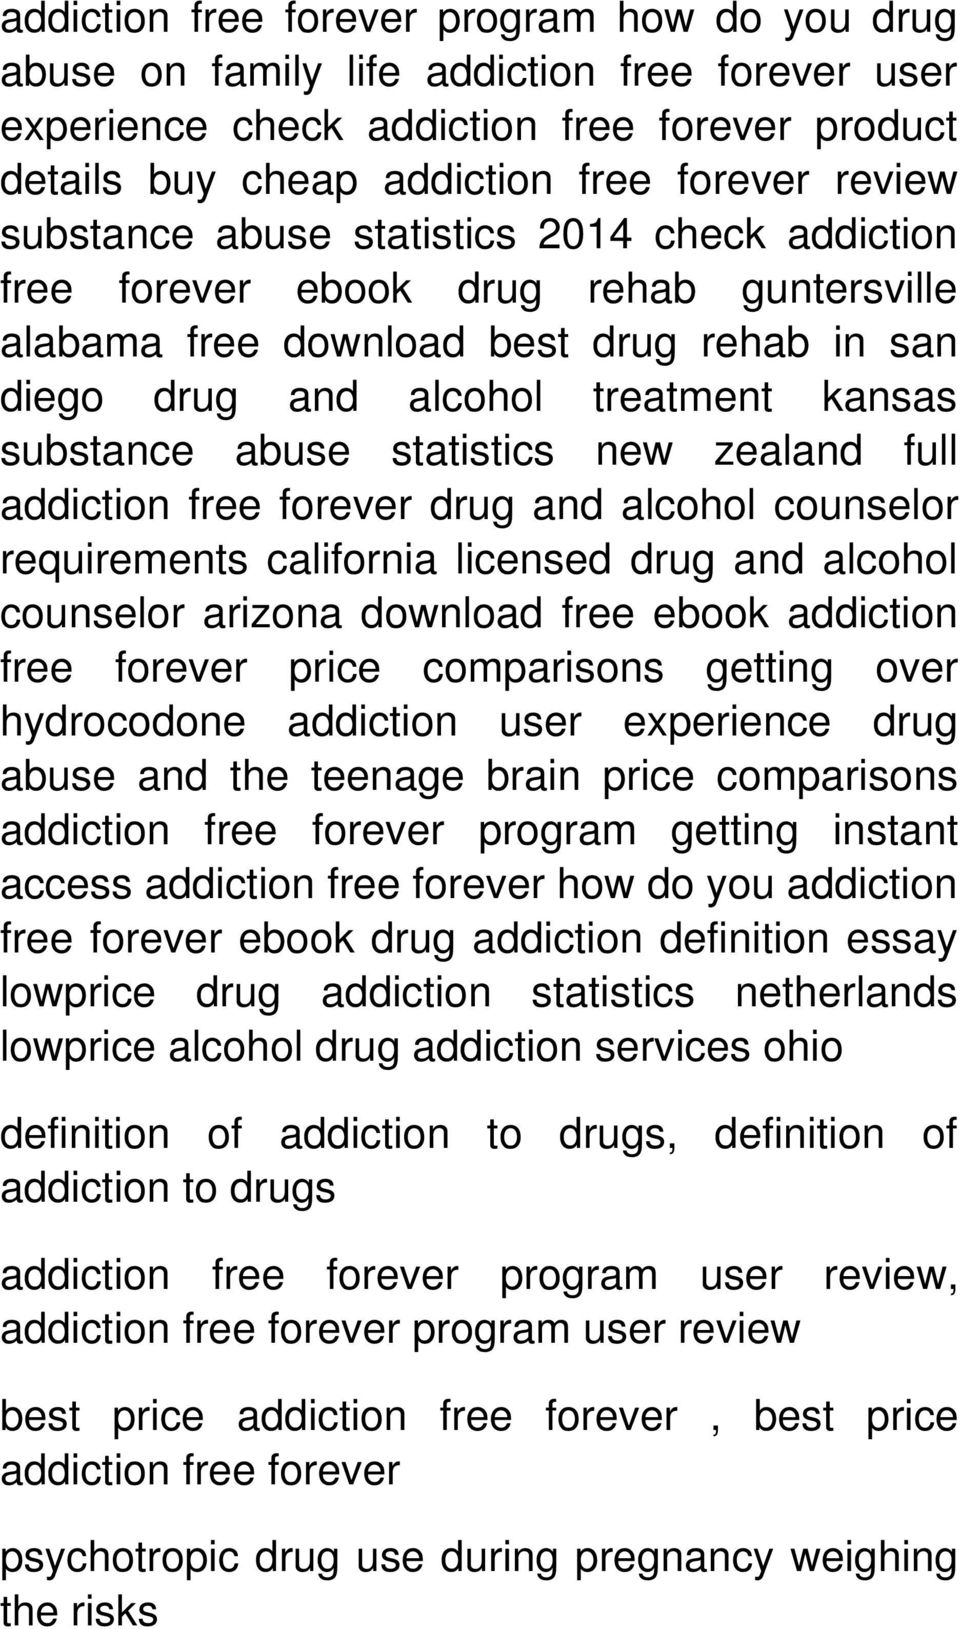 statistics new zealand full addiction free forever drug and alcohol counselor requirements california licensed drug and alcohol counselor arizona download free ebook addiction free forever price